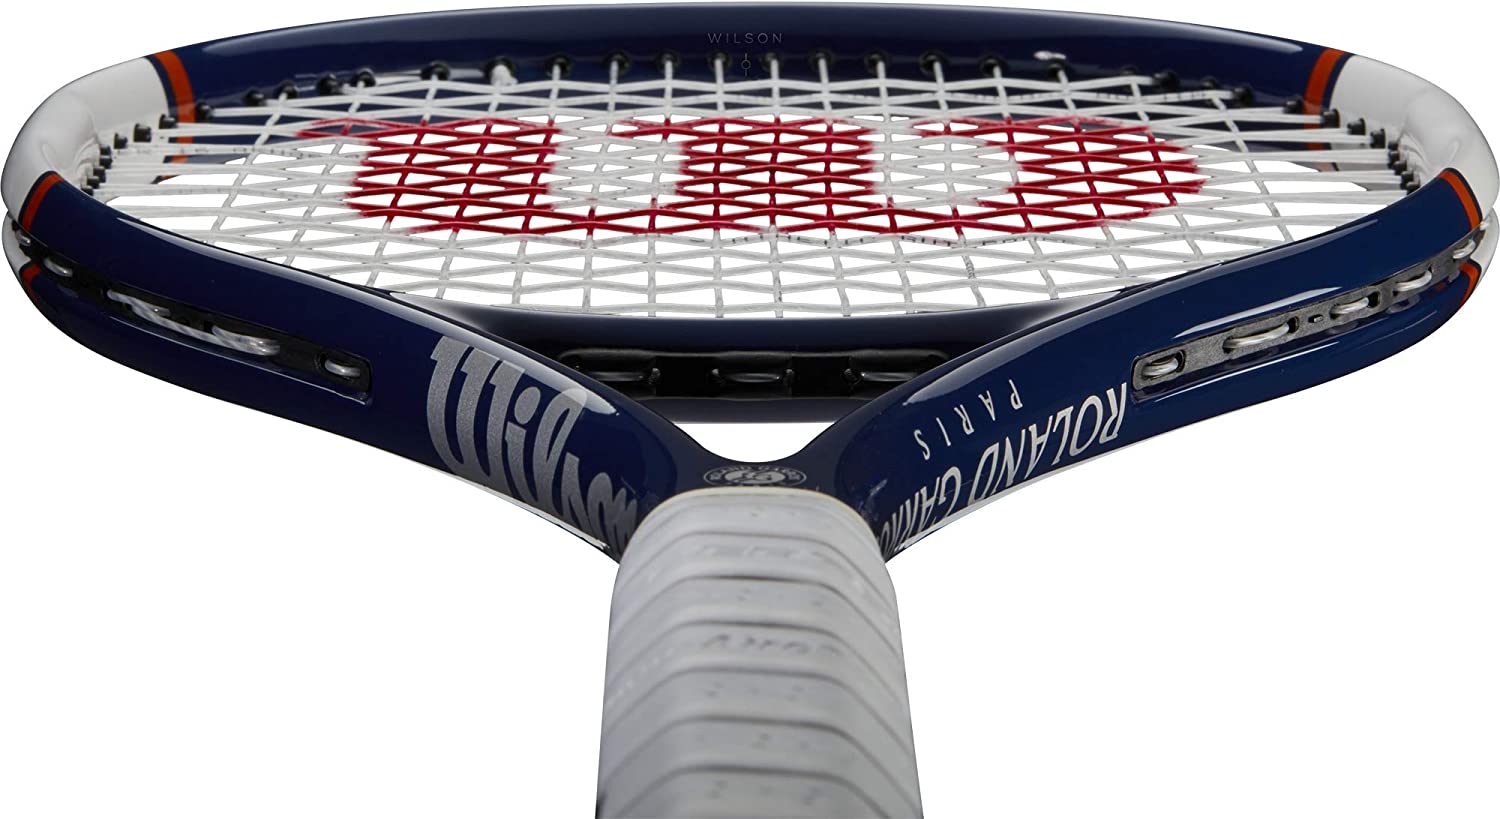 The Wilson Roland Garros Equipe HP Tennis Racket available for sale at GSM Sports.